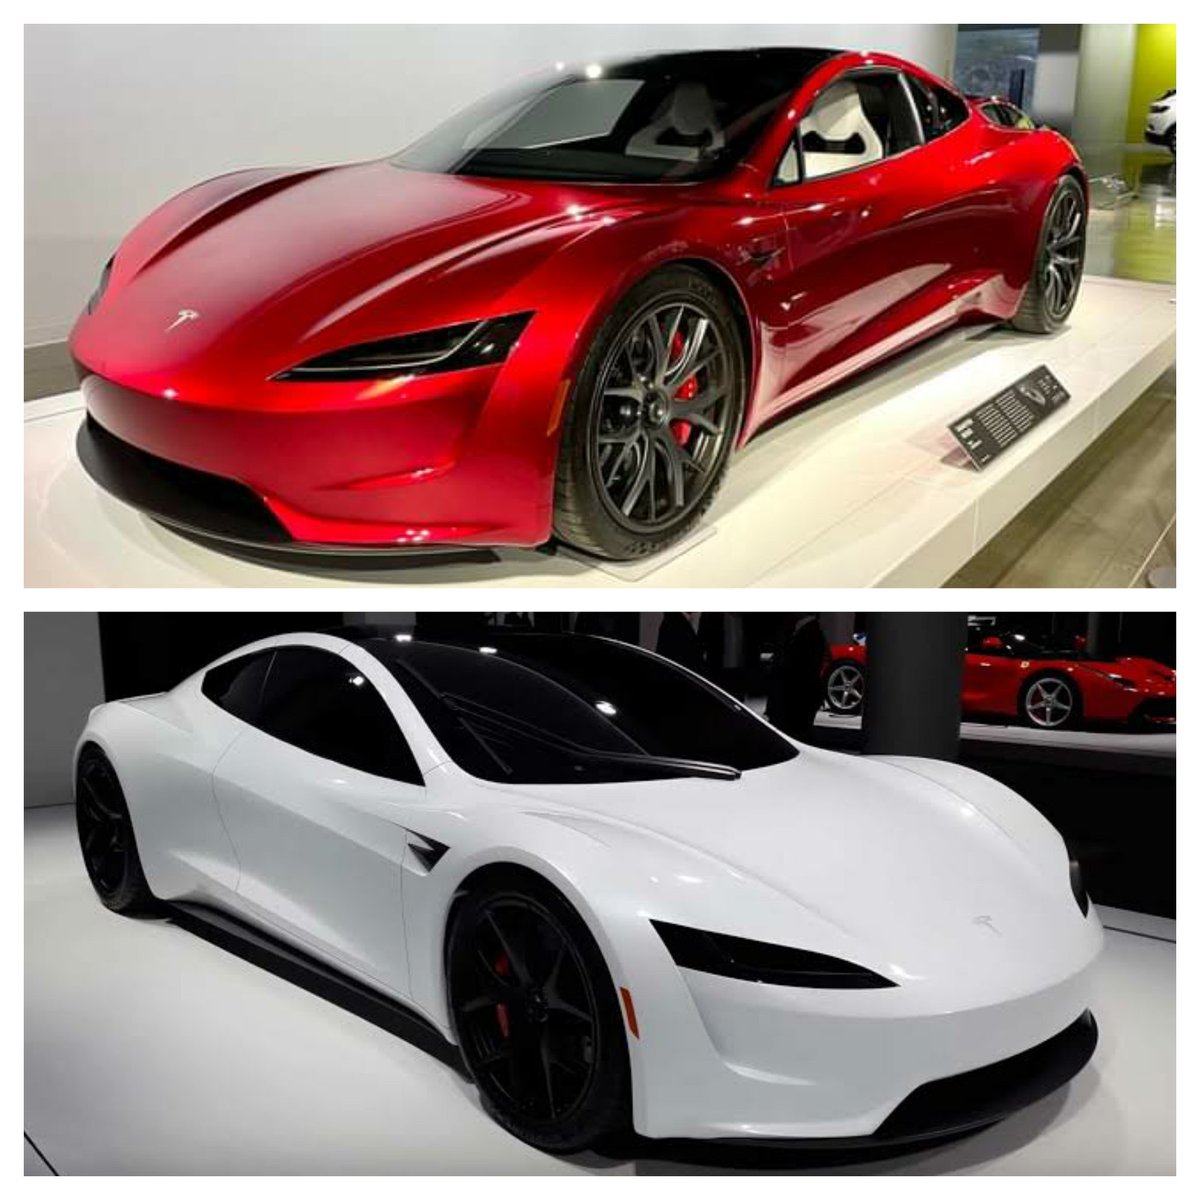 TESLA ROADSTER IN RED OR WHITE?⚡